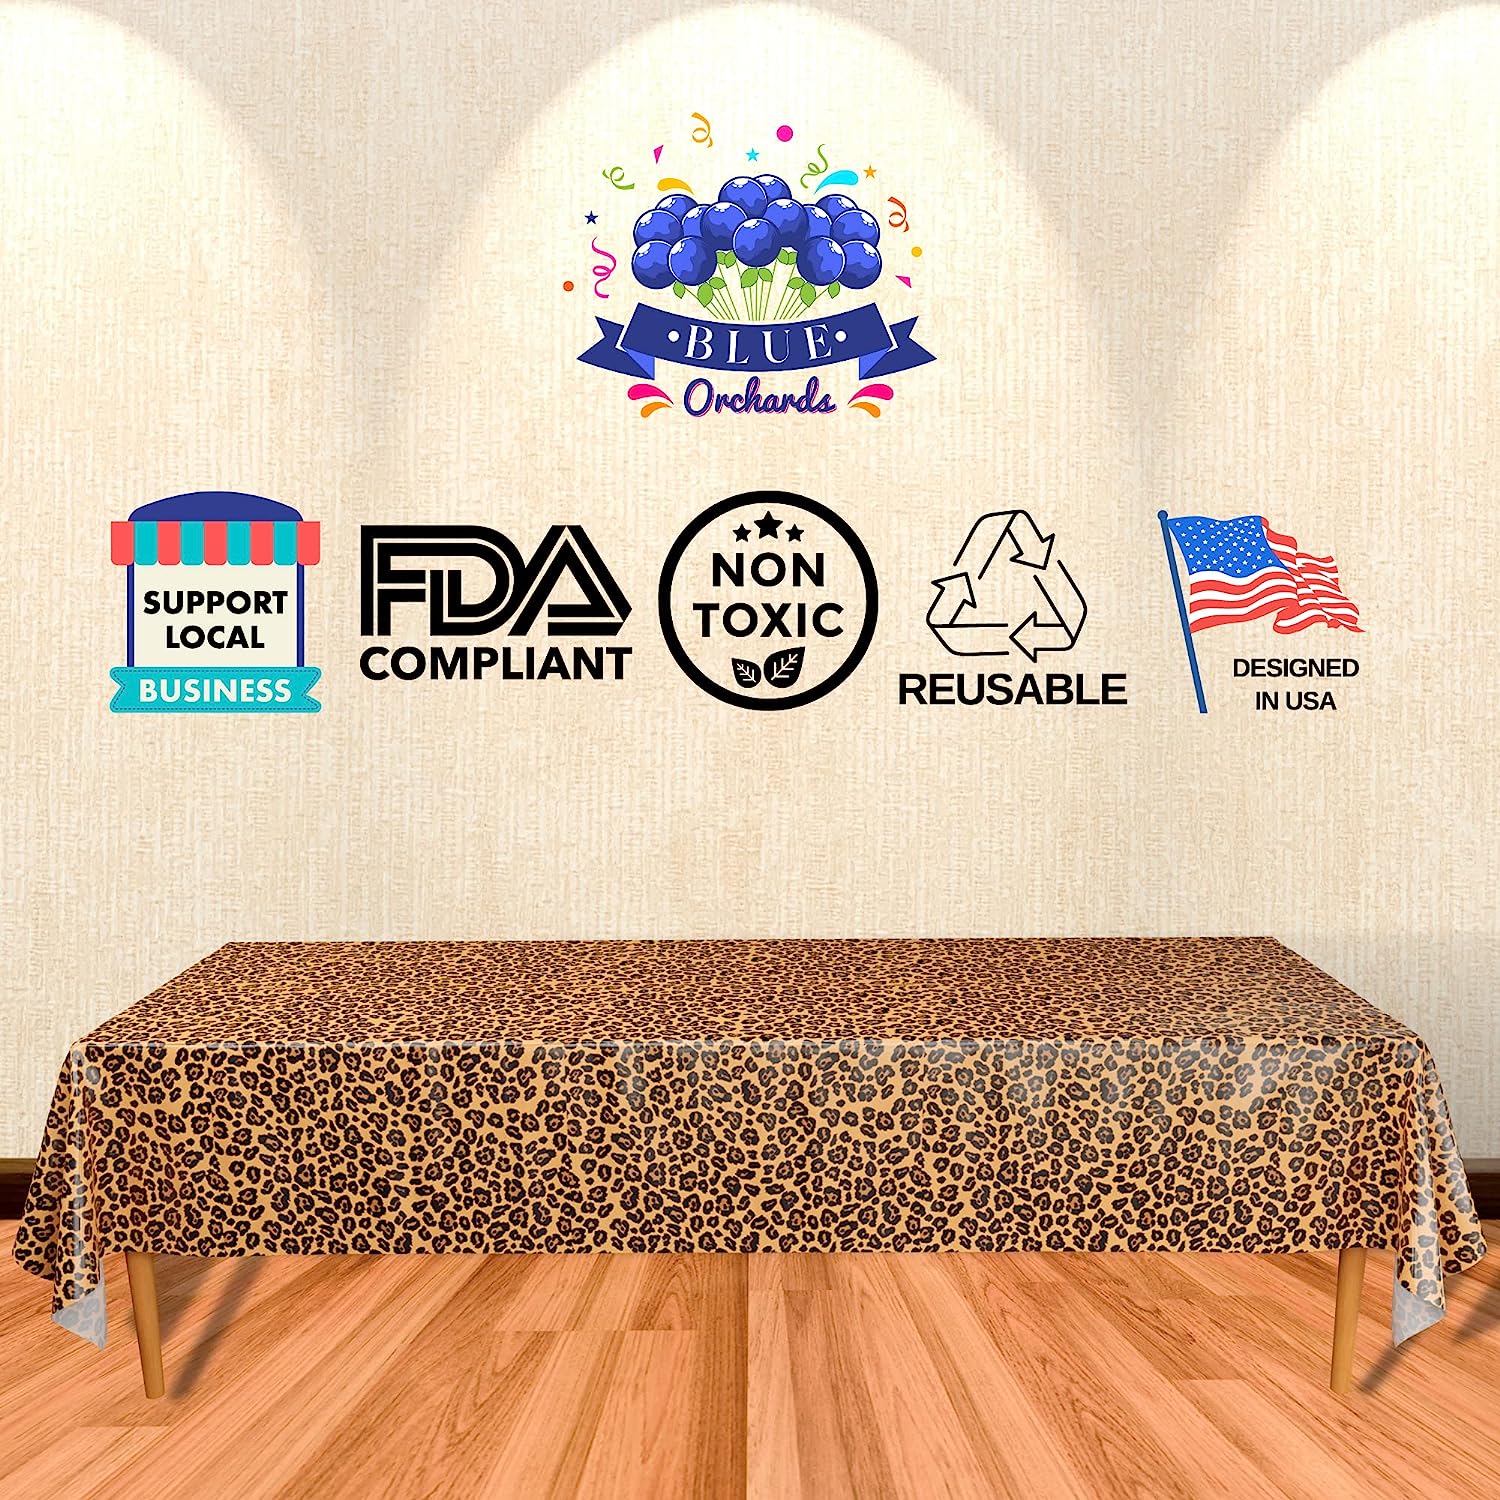 FDA compliant, non toxic, reusable, designed in USA, realistic Leopard Table covers are the perfect addition to your safari, cheetah, jungle animal, or African savanah birthday party or other celebration!